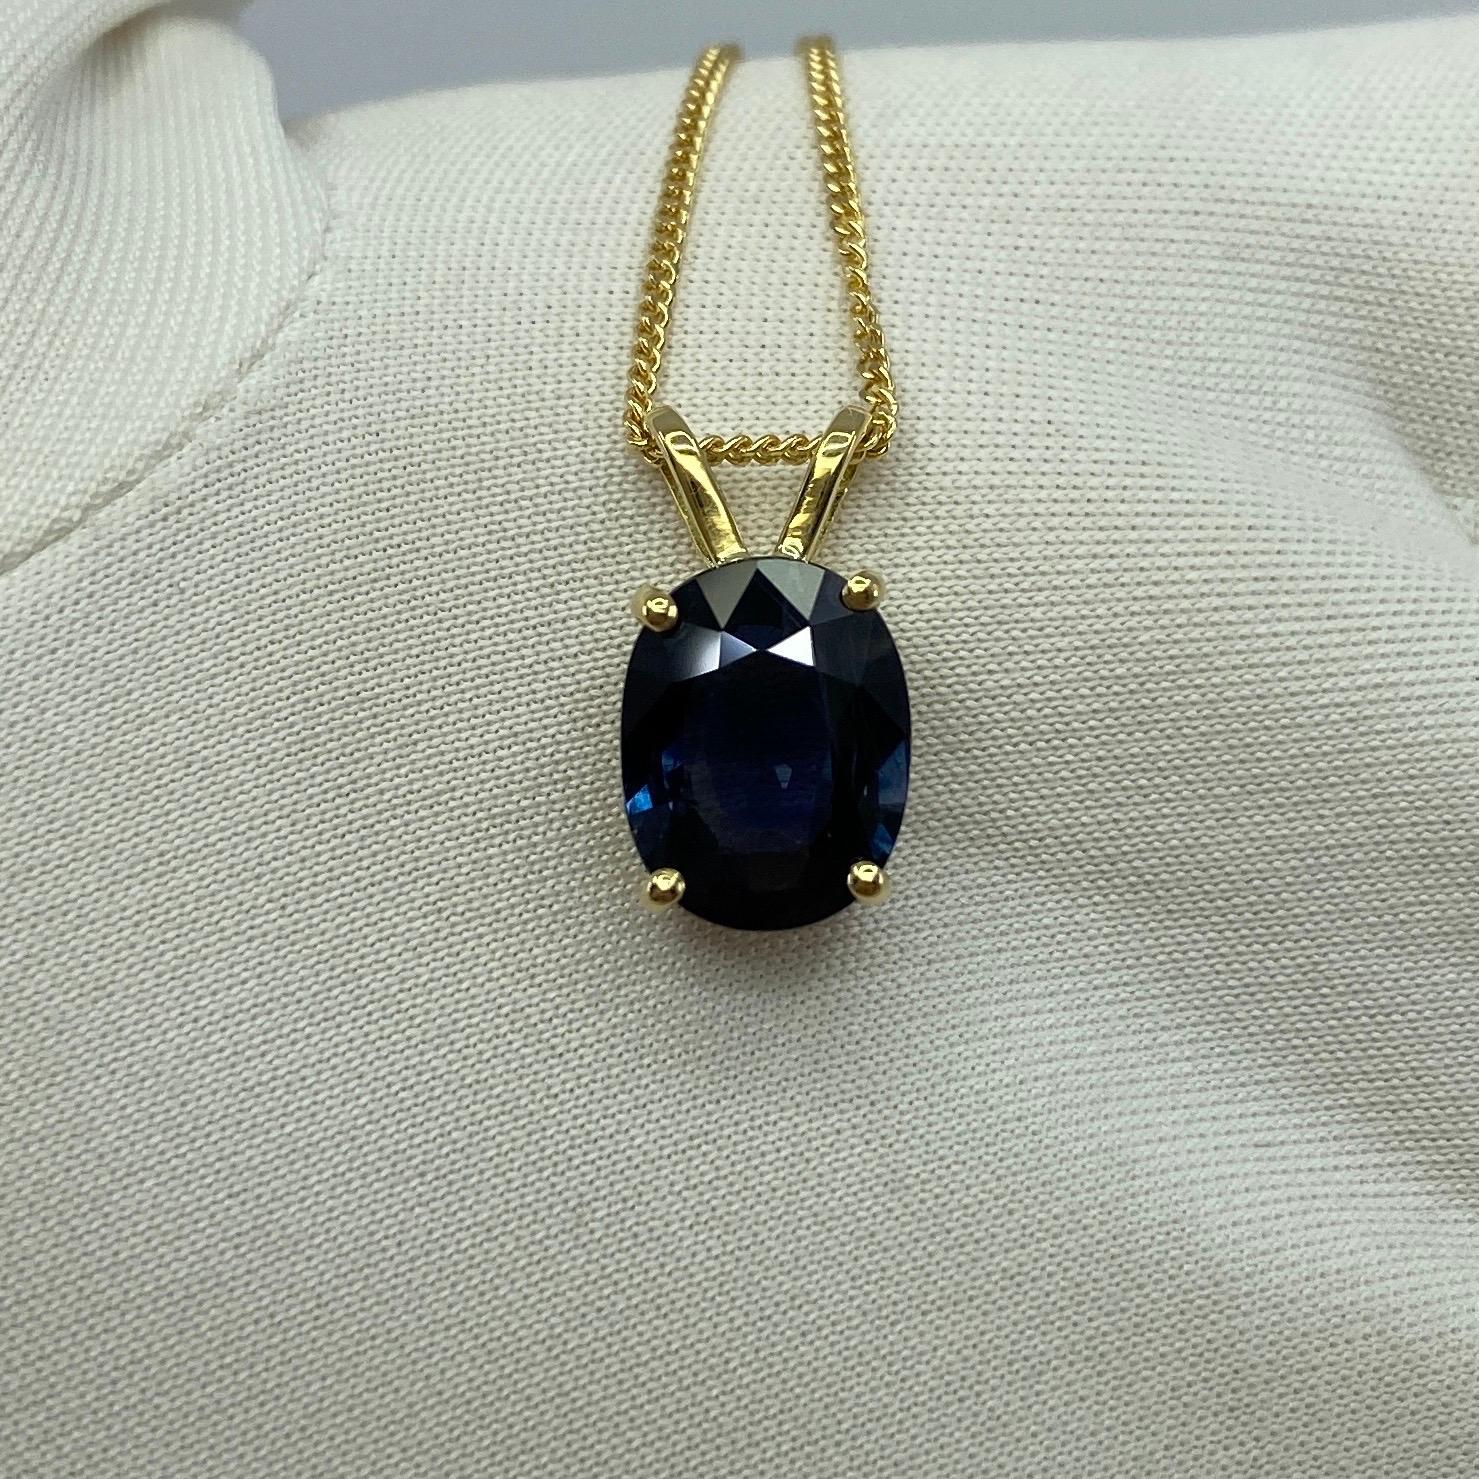 GIA Certified 2.51ct Untreated Deep Blue Sapphire Oval 18k Yellow Gold Pendant 6